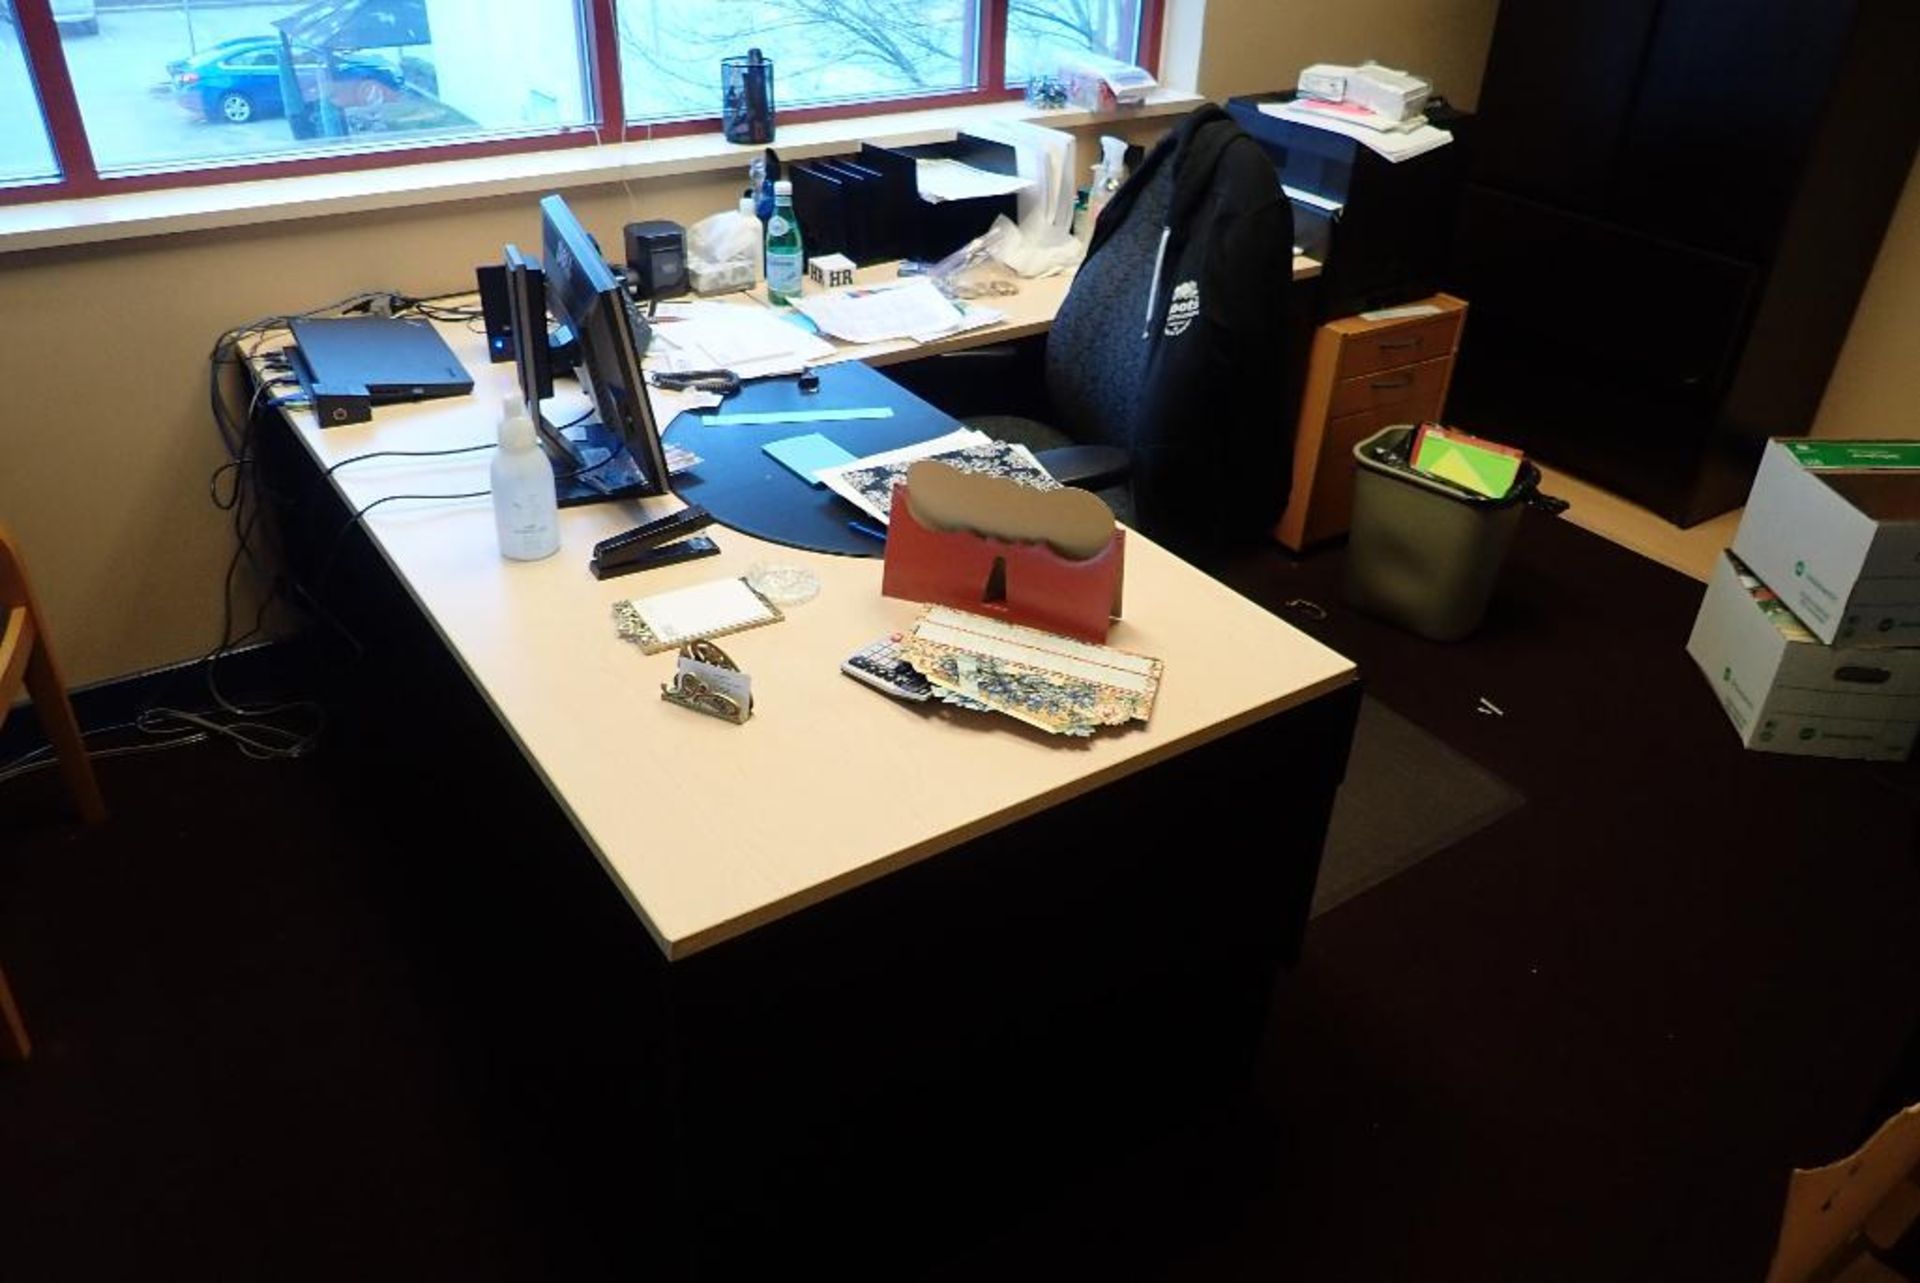 Contents of office, desk, chair, cabinet. **Rigging Fee: $150** (Located in Delta, BC Canada.)